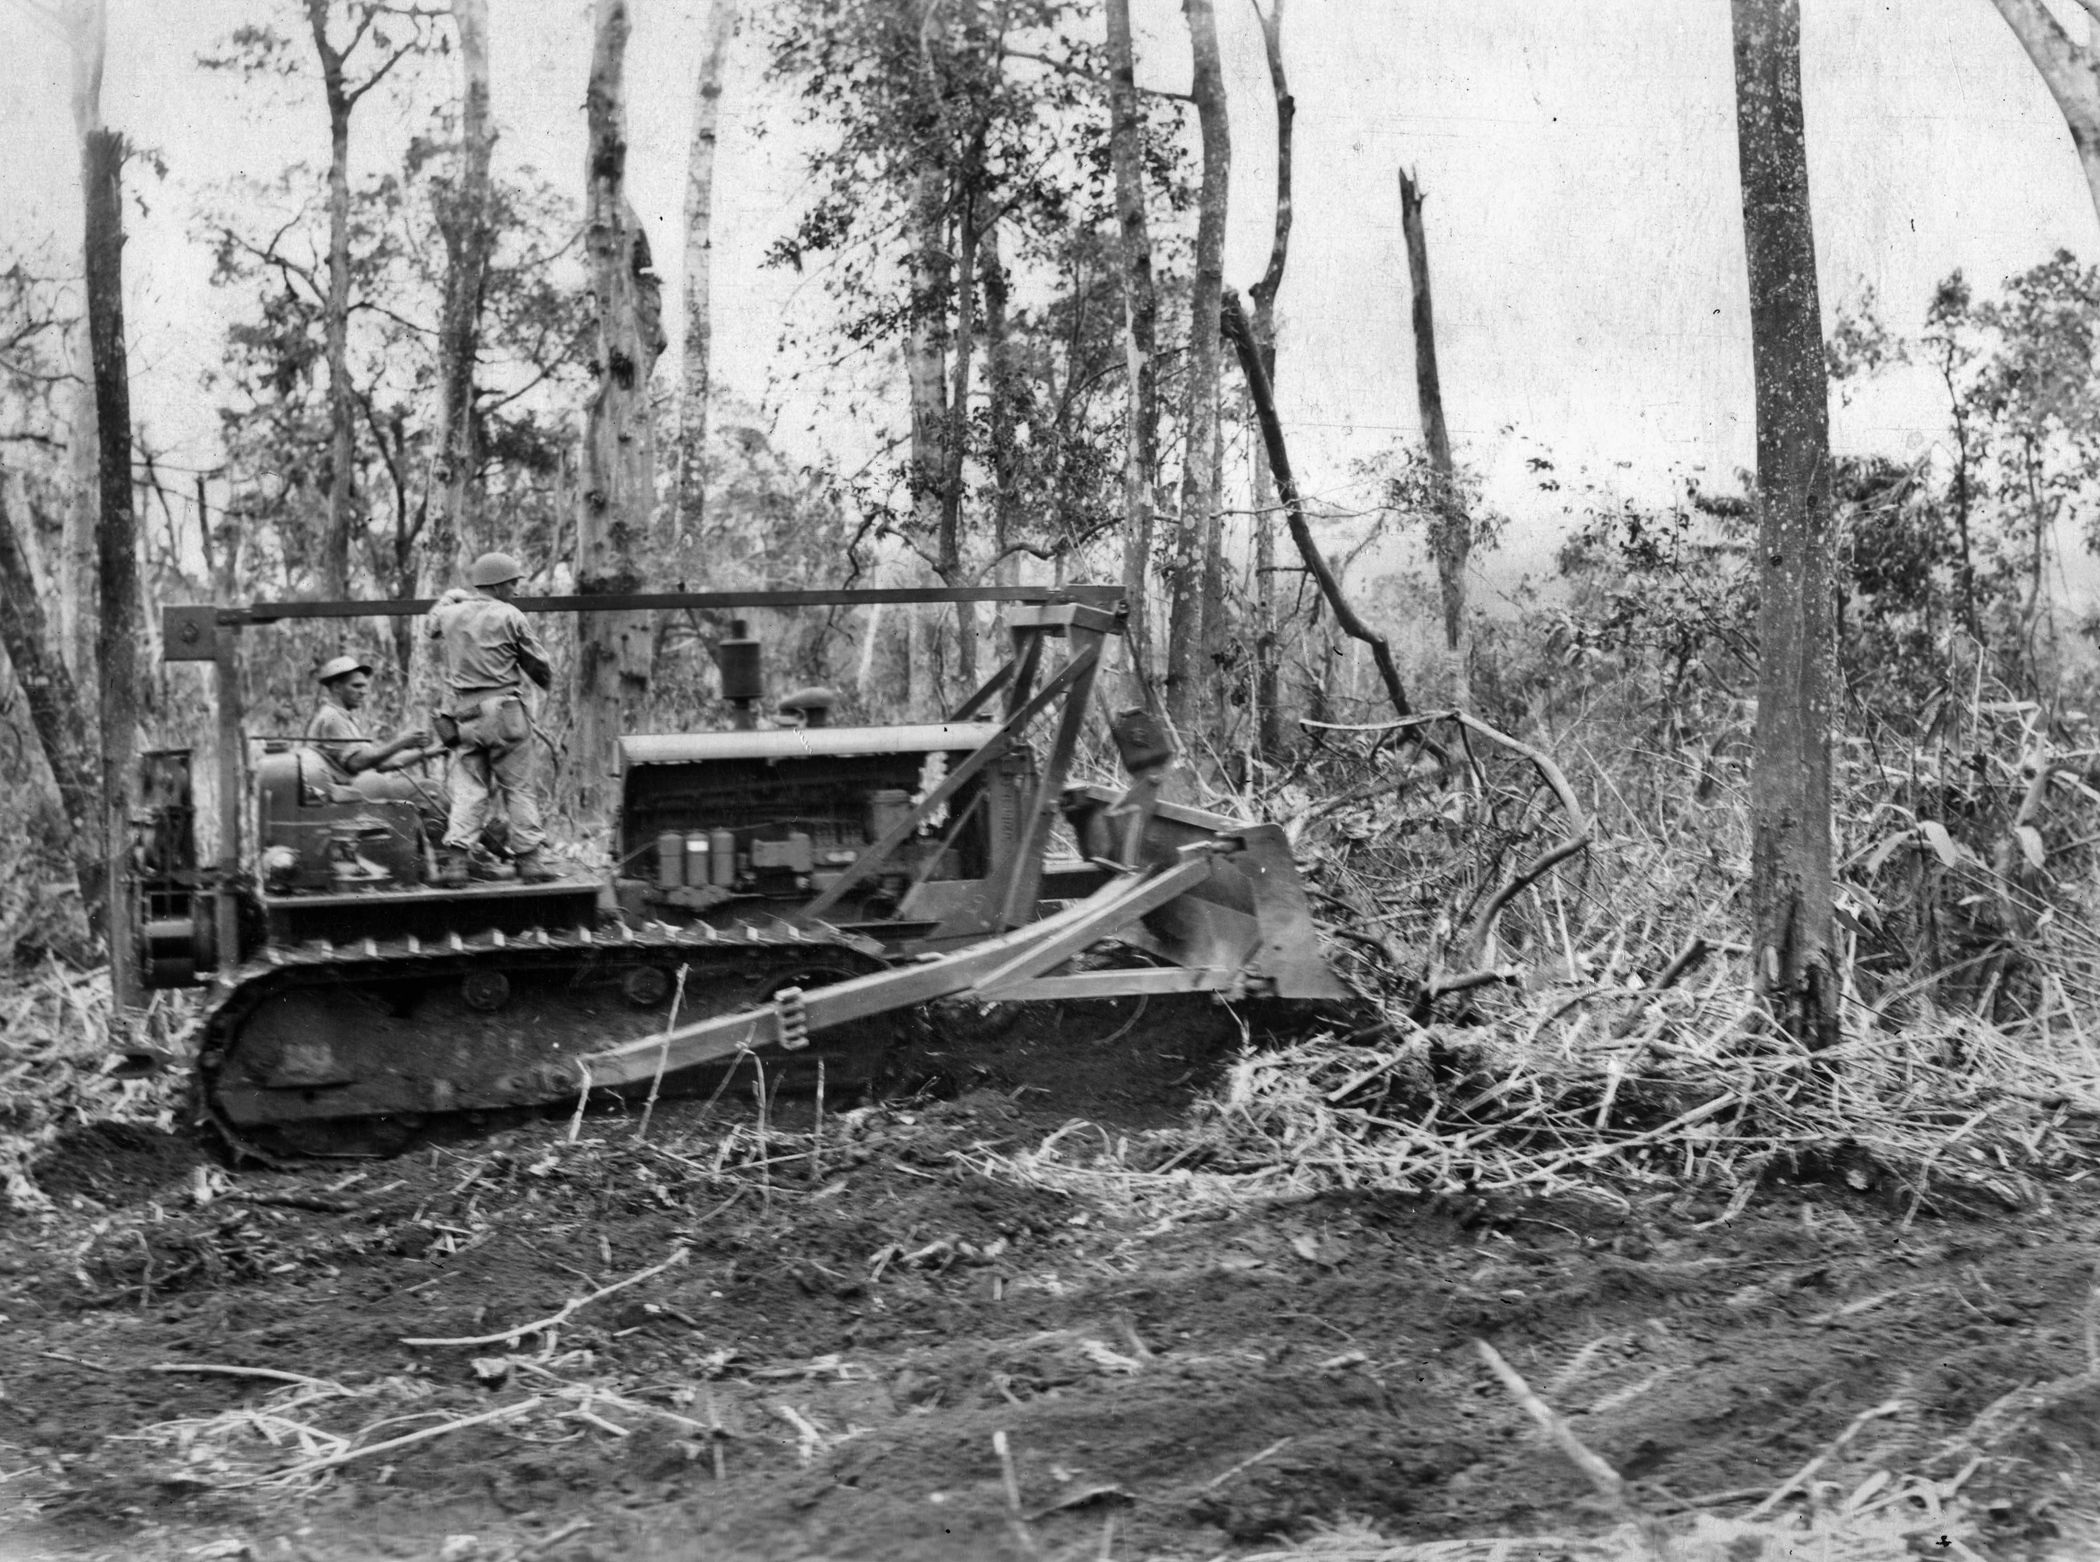 Heavy equipment such as this bulldozer was used to clear areas for supply depots and aid stations and to cut primitive roads through the jungle. At times, bulldozers were used in combat to silence particularly stubborn Japanese strongpoints. 